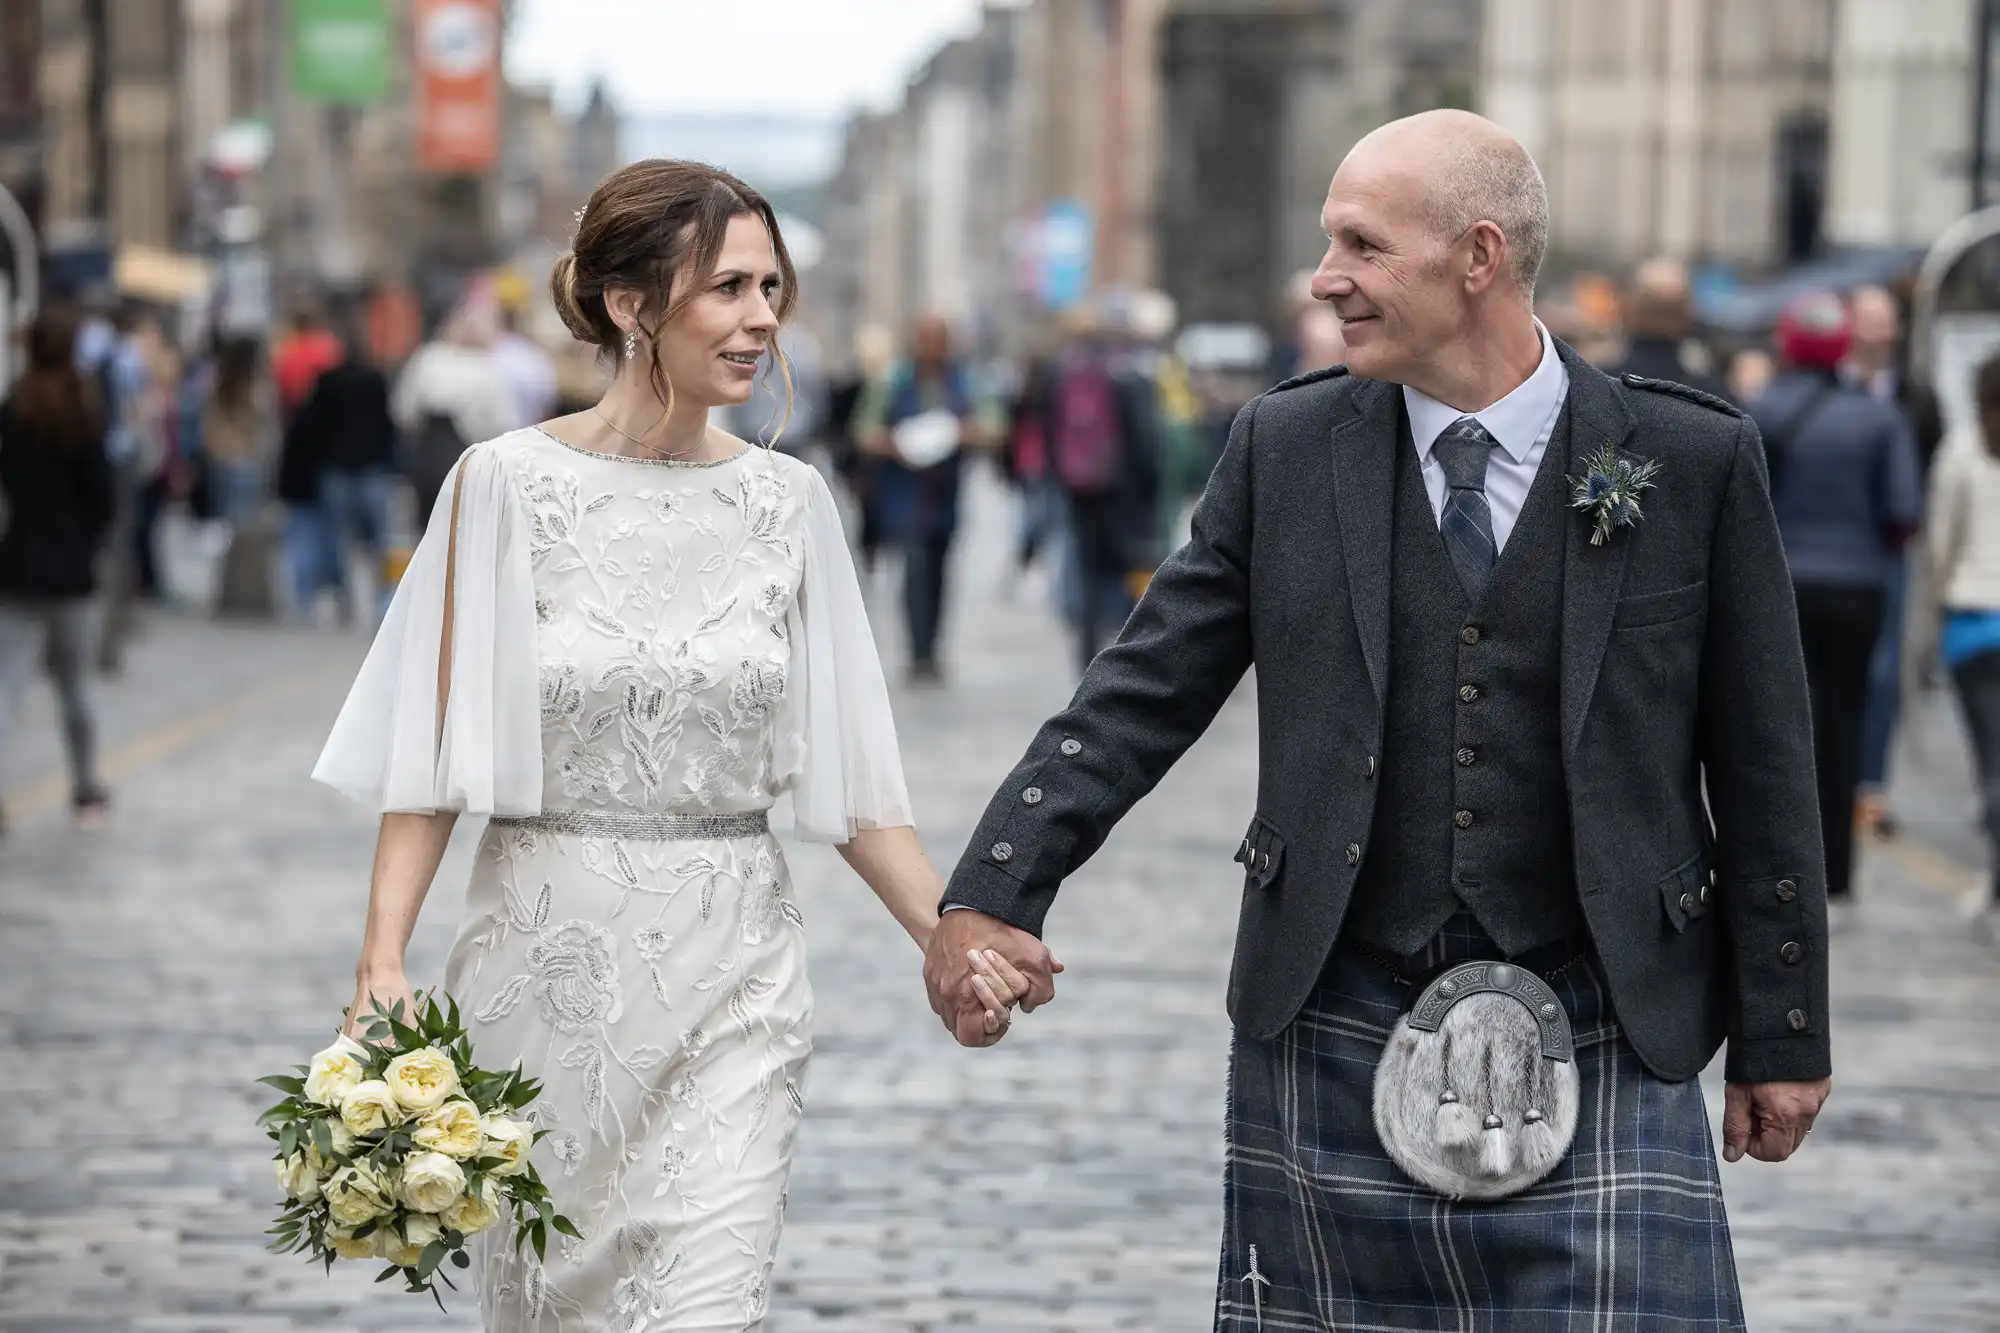 A couple, holding hands, walk down a cobblestone street dressed in wedding attire, with the man wearing a kilt and the woman holding a bouquet of flowers.